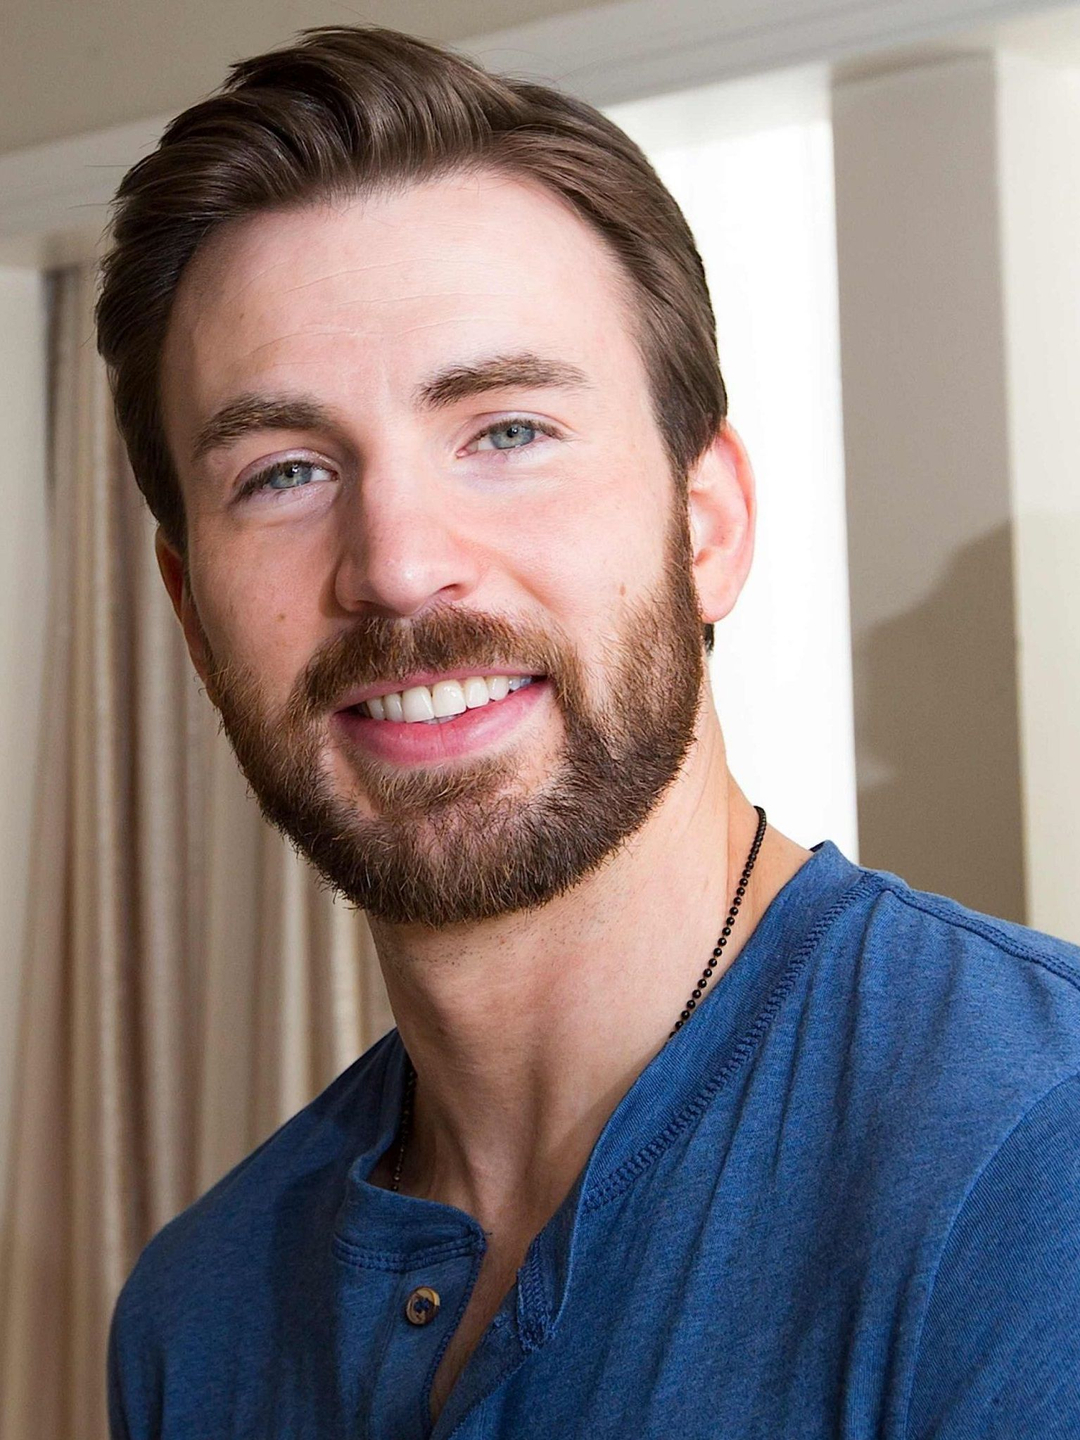 Chris Evans early life